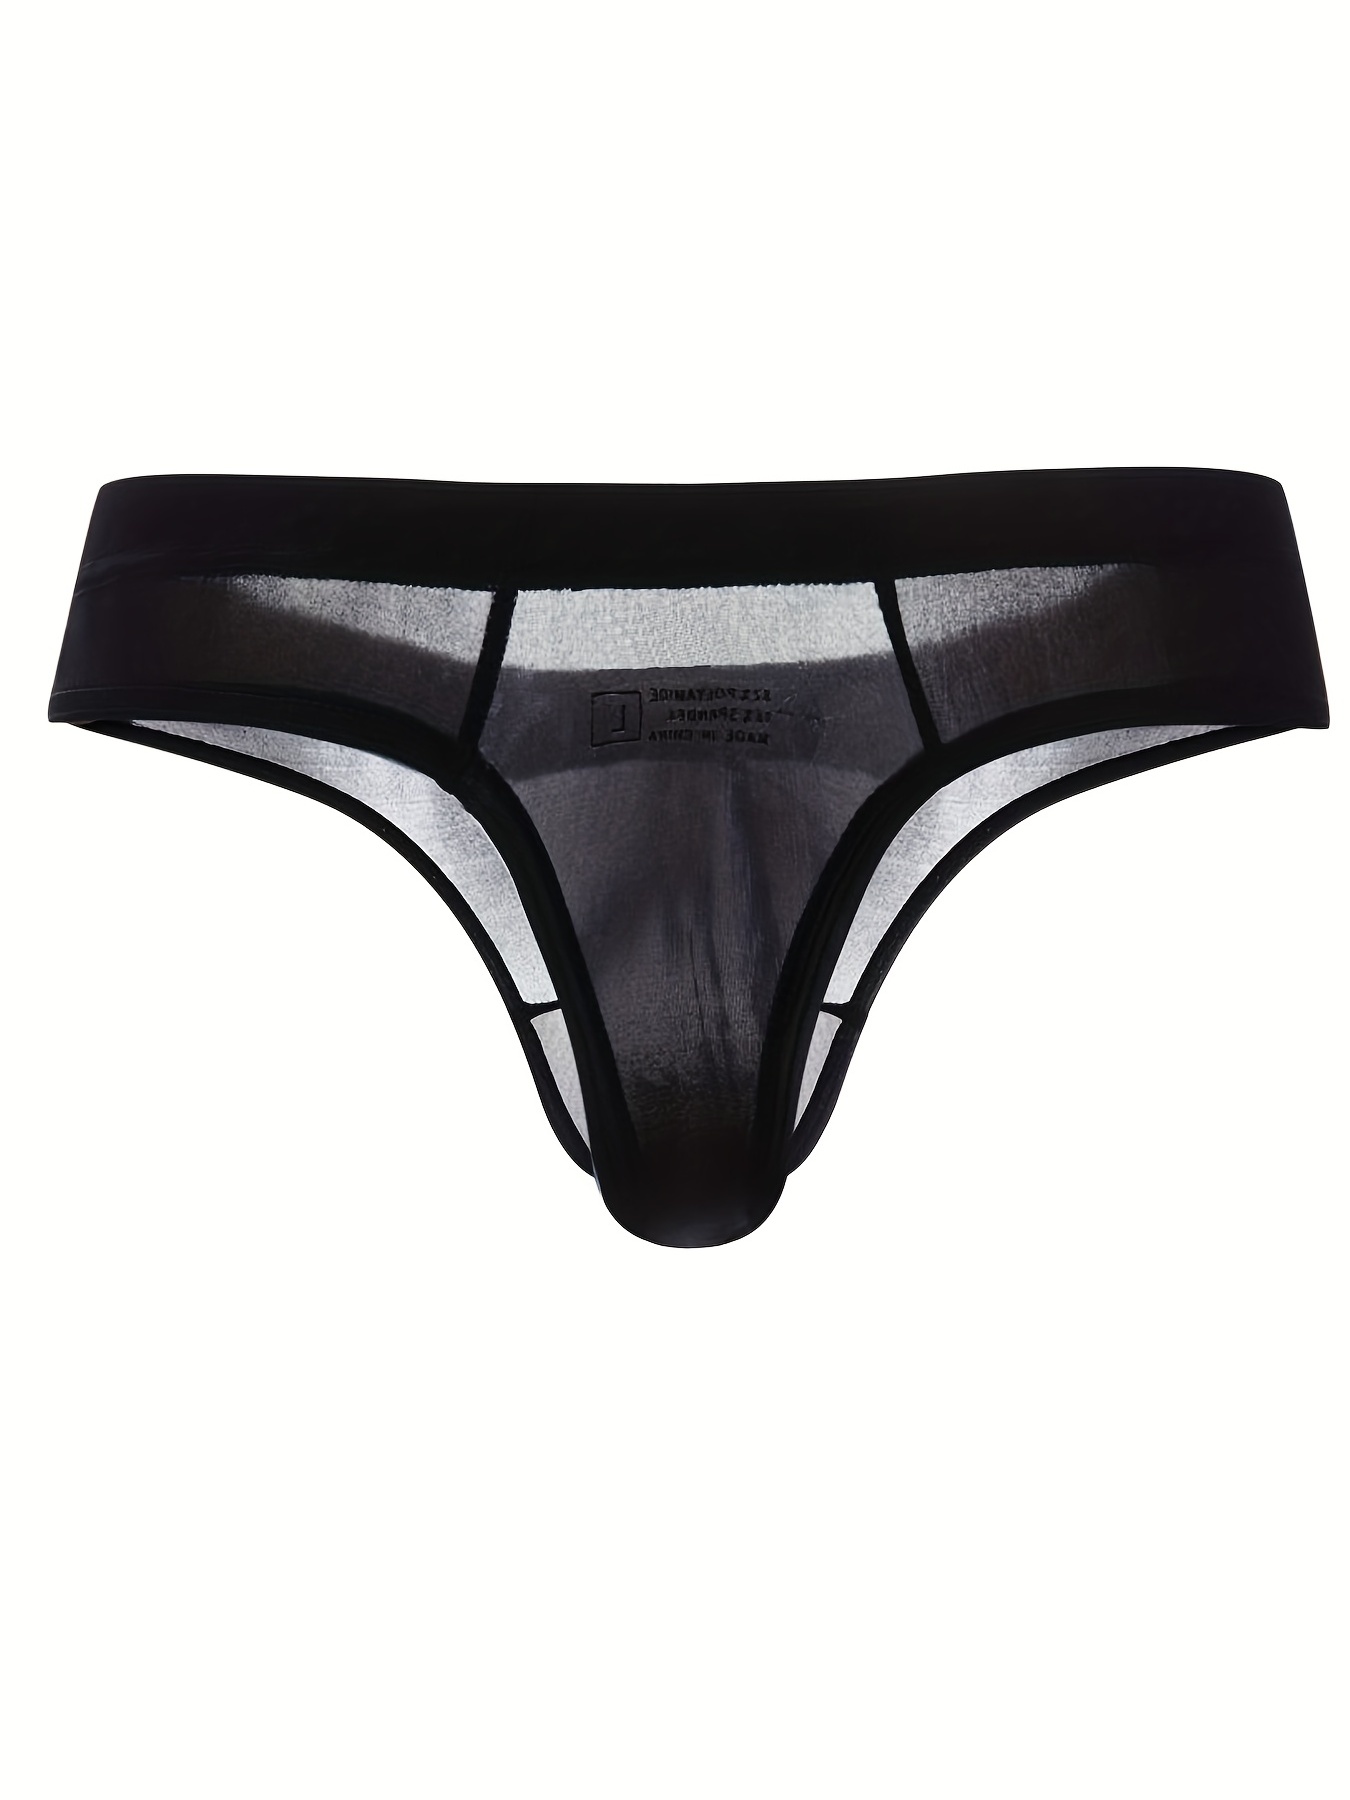 compulsoryking Men's Fun Front Opening Front Thong G-String T-Back Bikini  Briefs Underwears Underpant Hollow Out Plain Thong, Black, Medium :  : Clothing, Shoes & Accessories